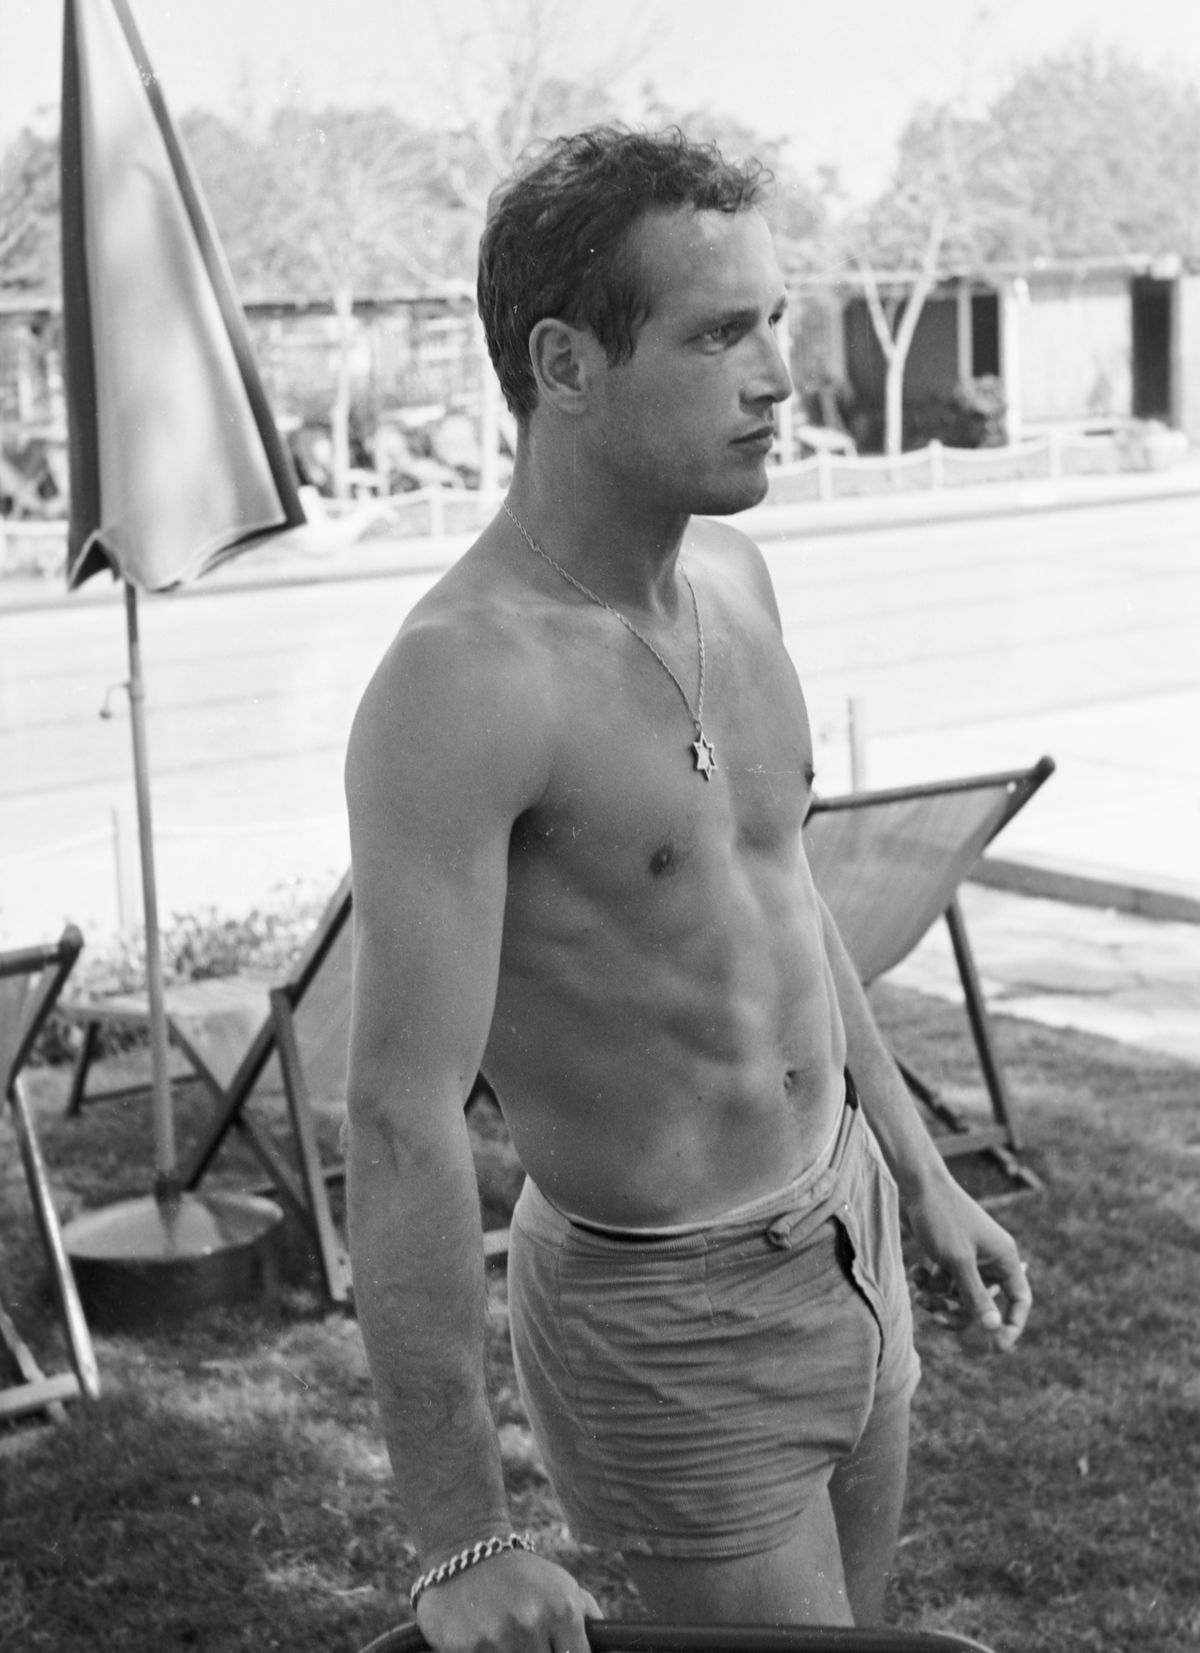 A shirtless Paul Newman in shorts smoking and leaning on a chair. He is wearing a chain necklace with a Star of David charm.